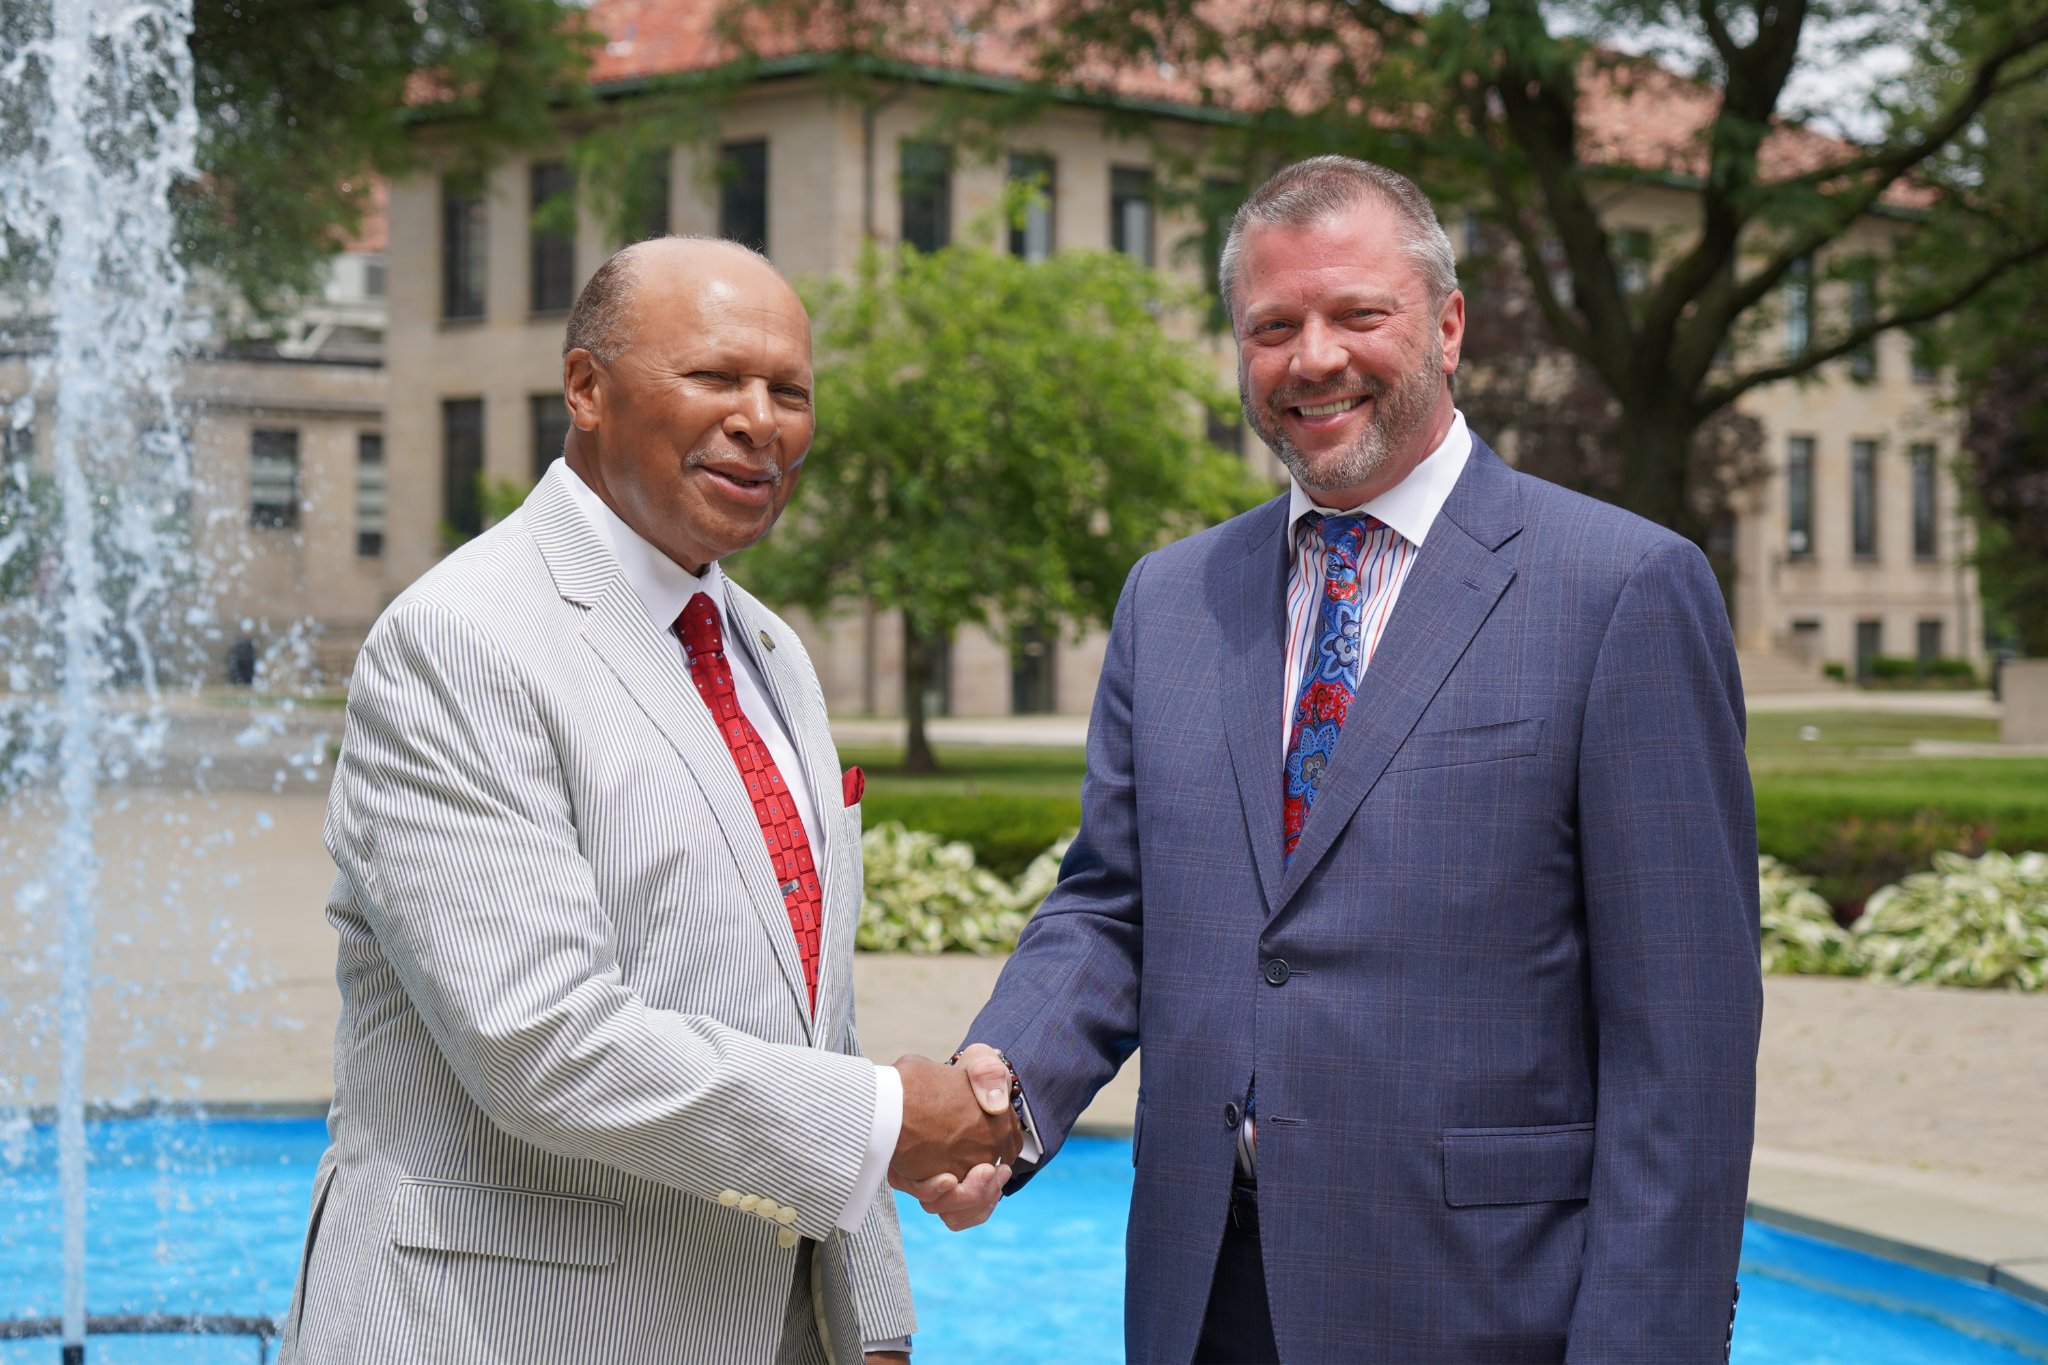 old president shakes hand with new president donald taylor